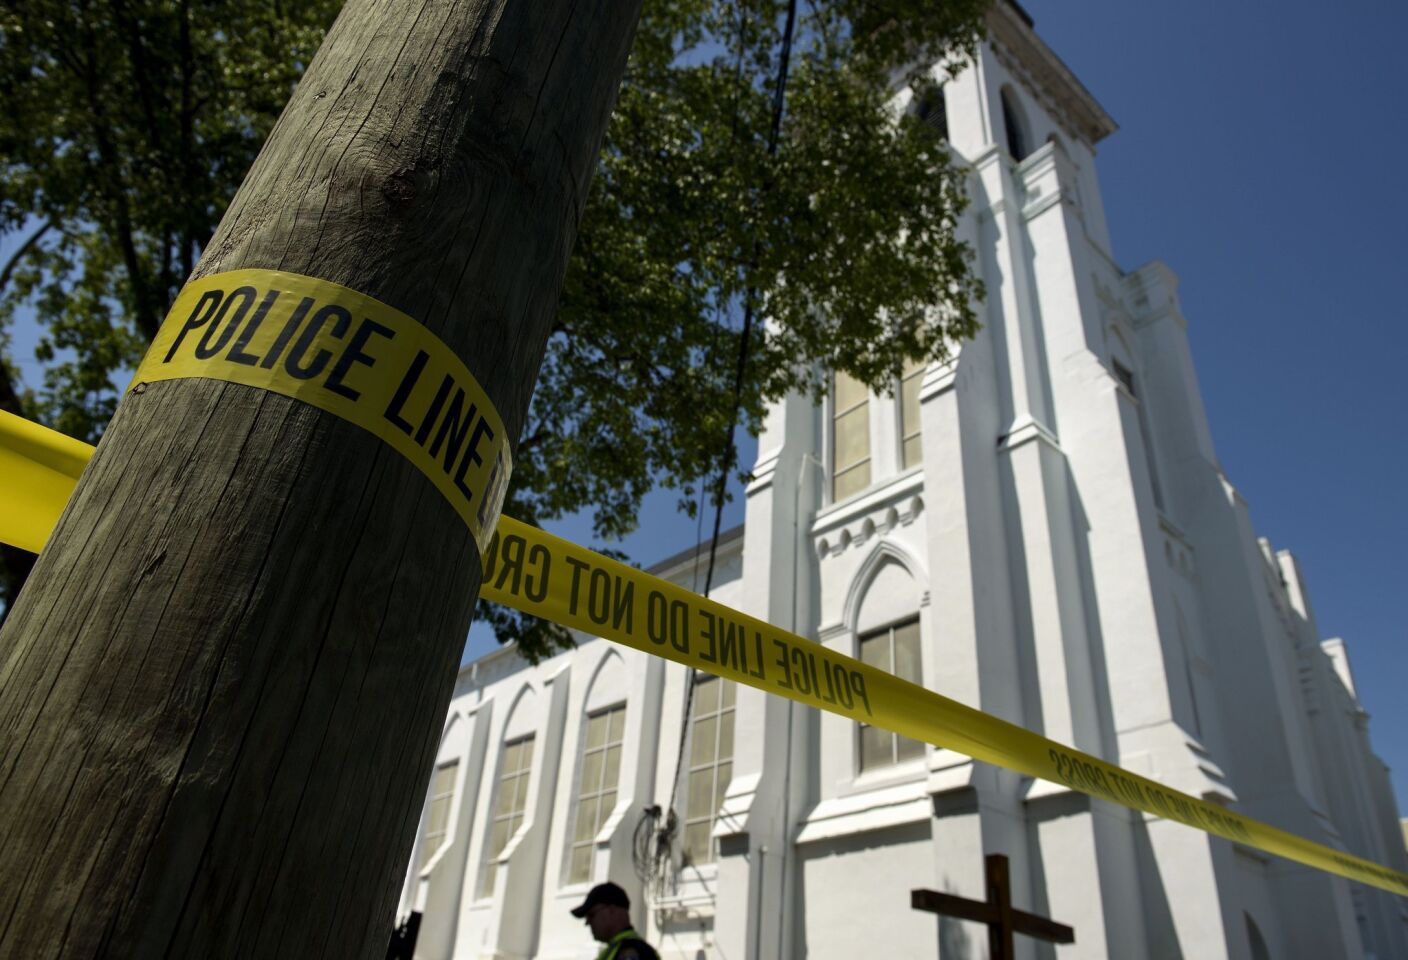 Police tape outside the Emanuel AME Church in Charleston, S.C., after the mass shooting inside Wednesday.